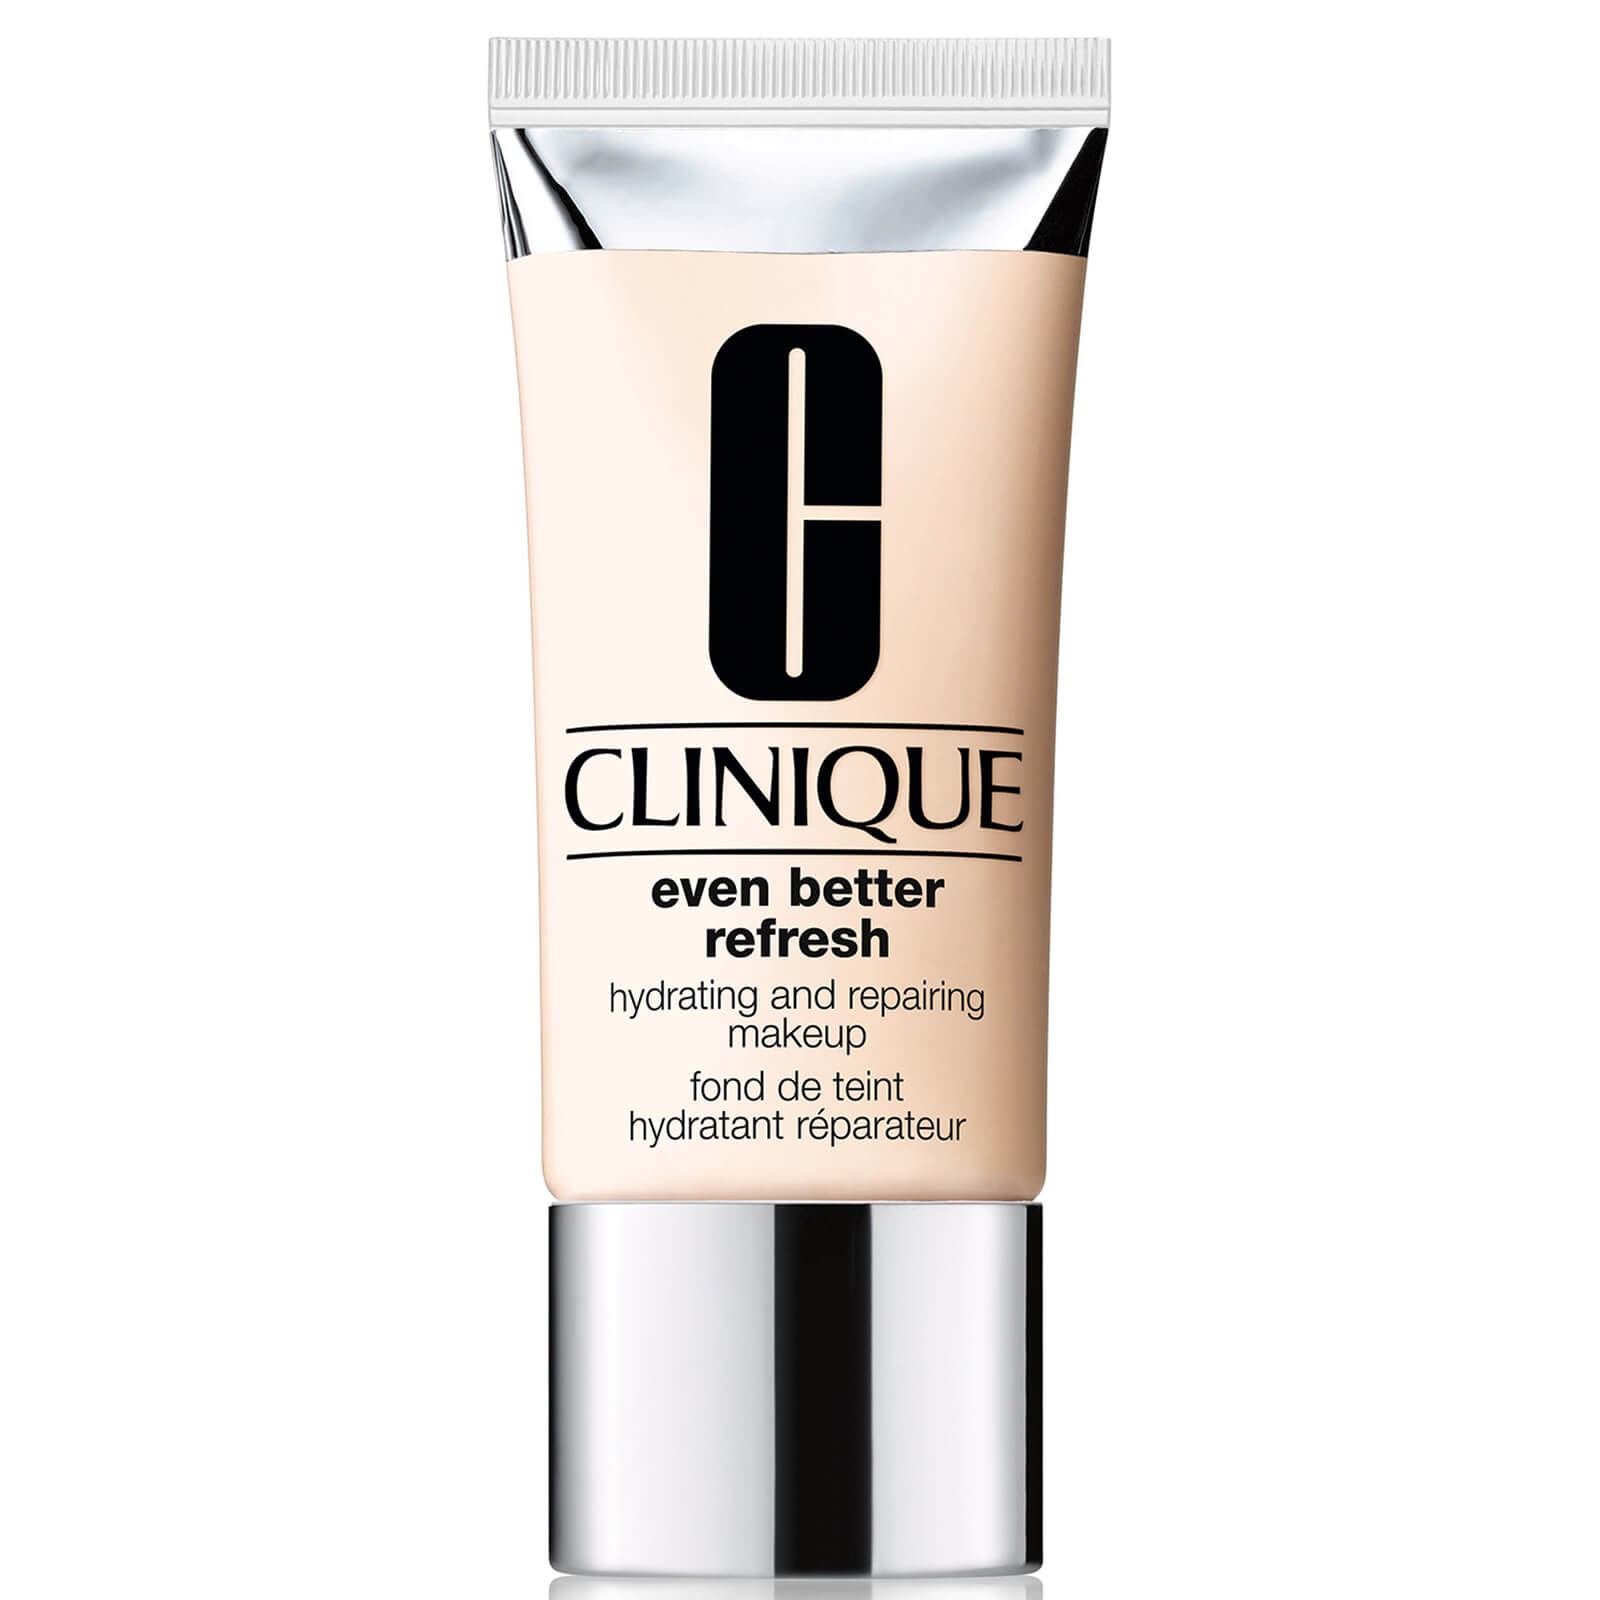 Clinique Even Better Refresh Hydrating and Repairing Makeup 30ml (Various Shades) - WN 01 Flax